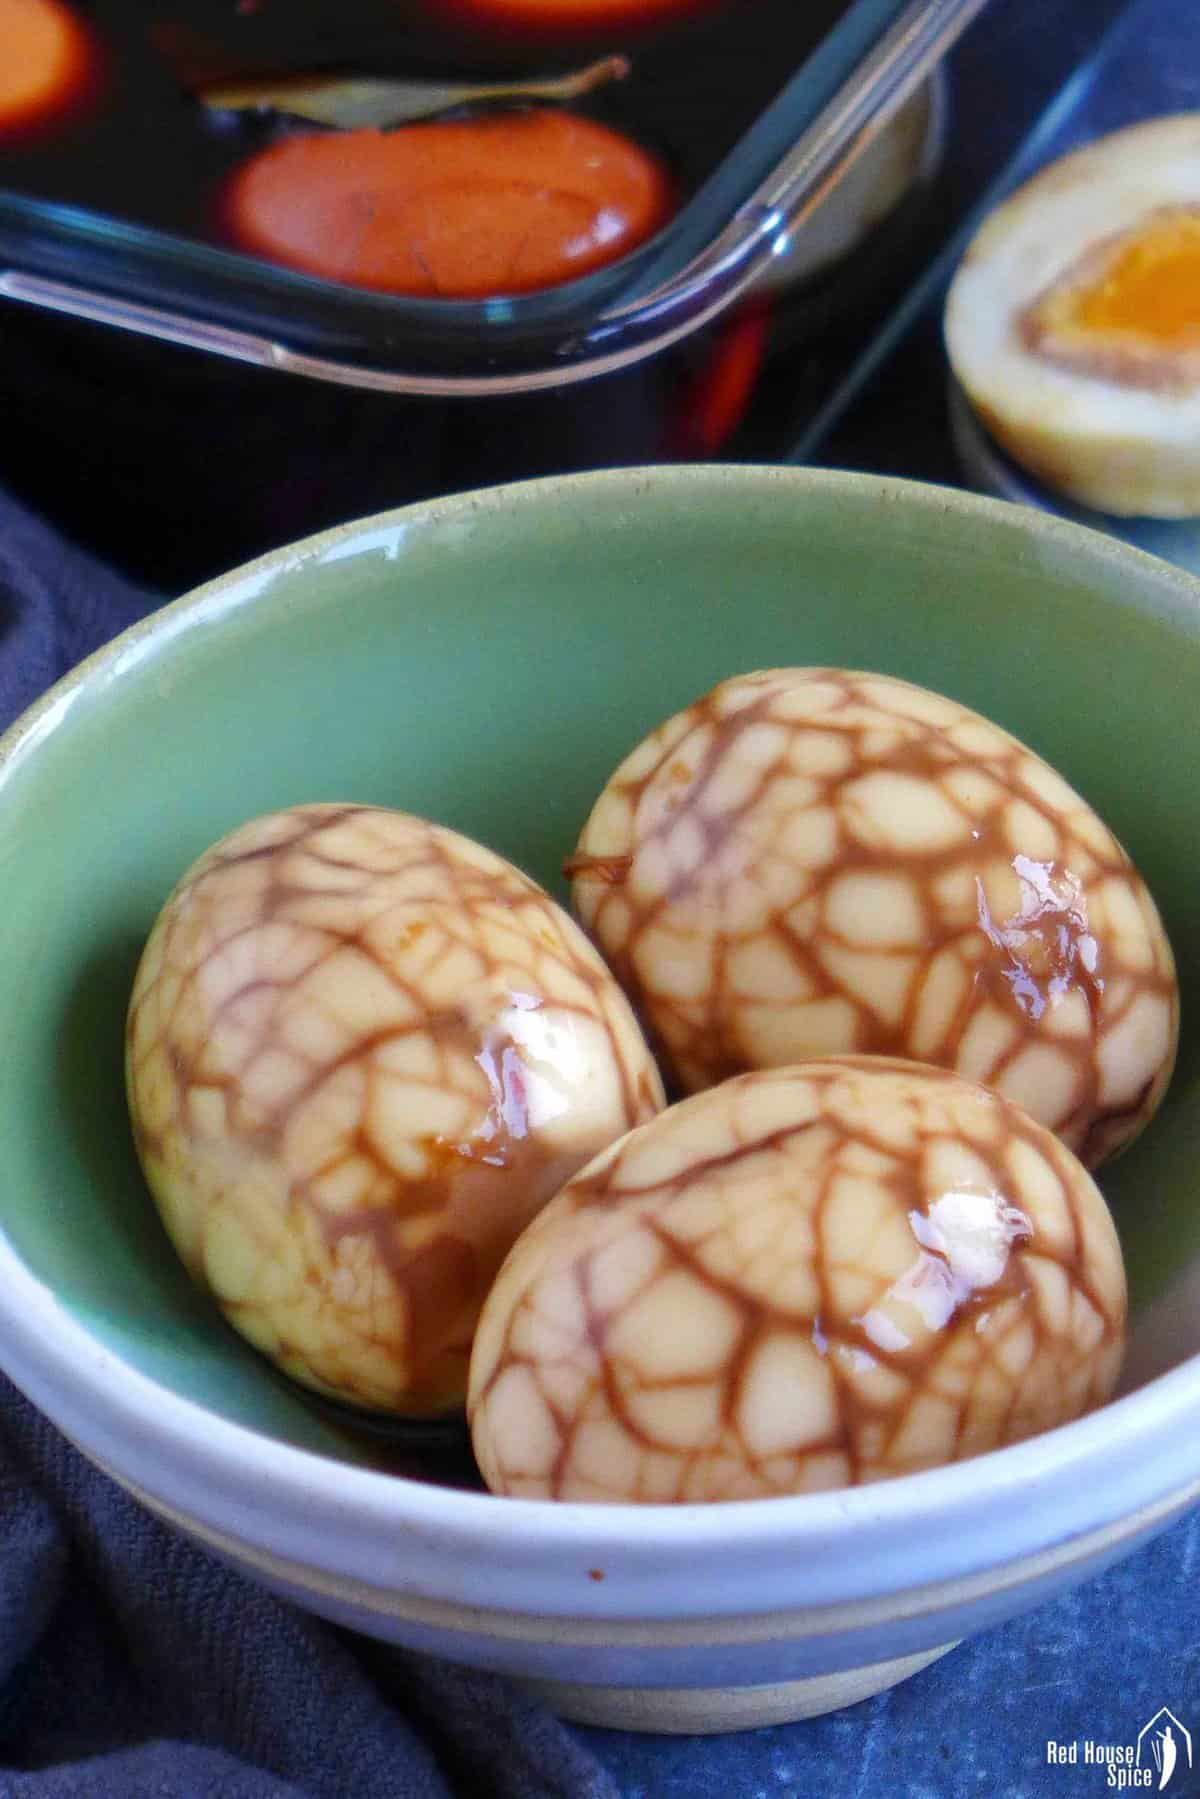 three Chinese tea eggs with marbled pattern.